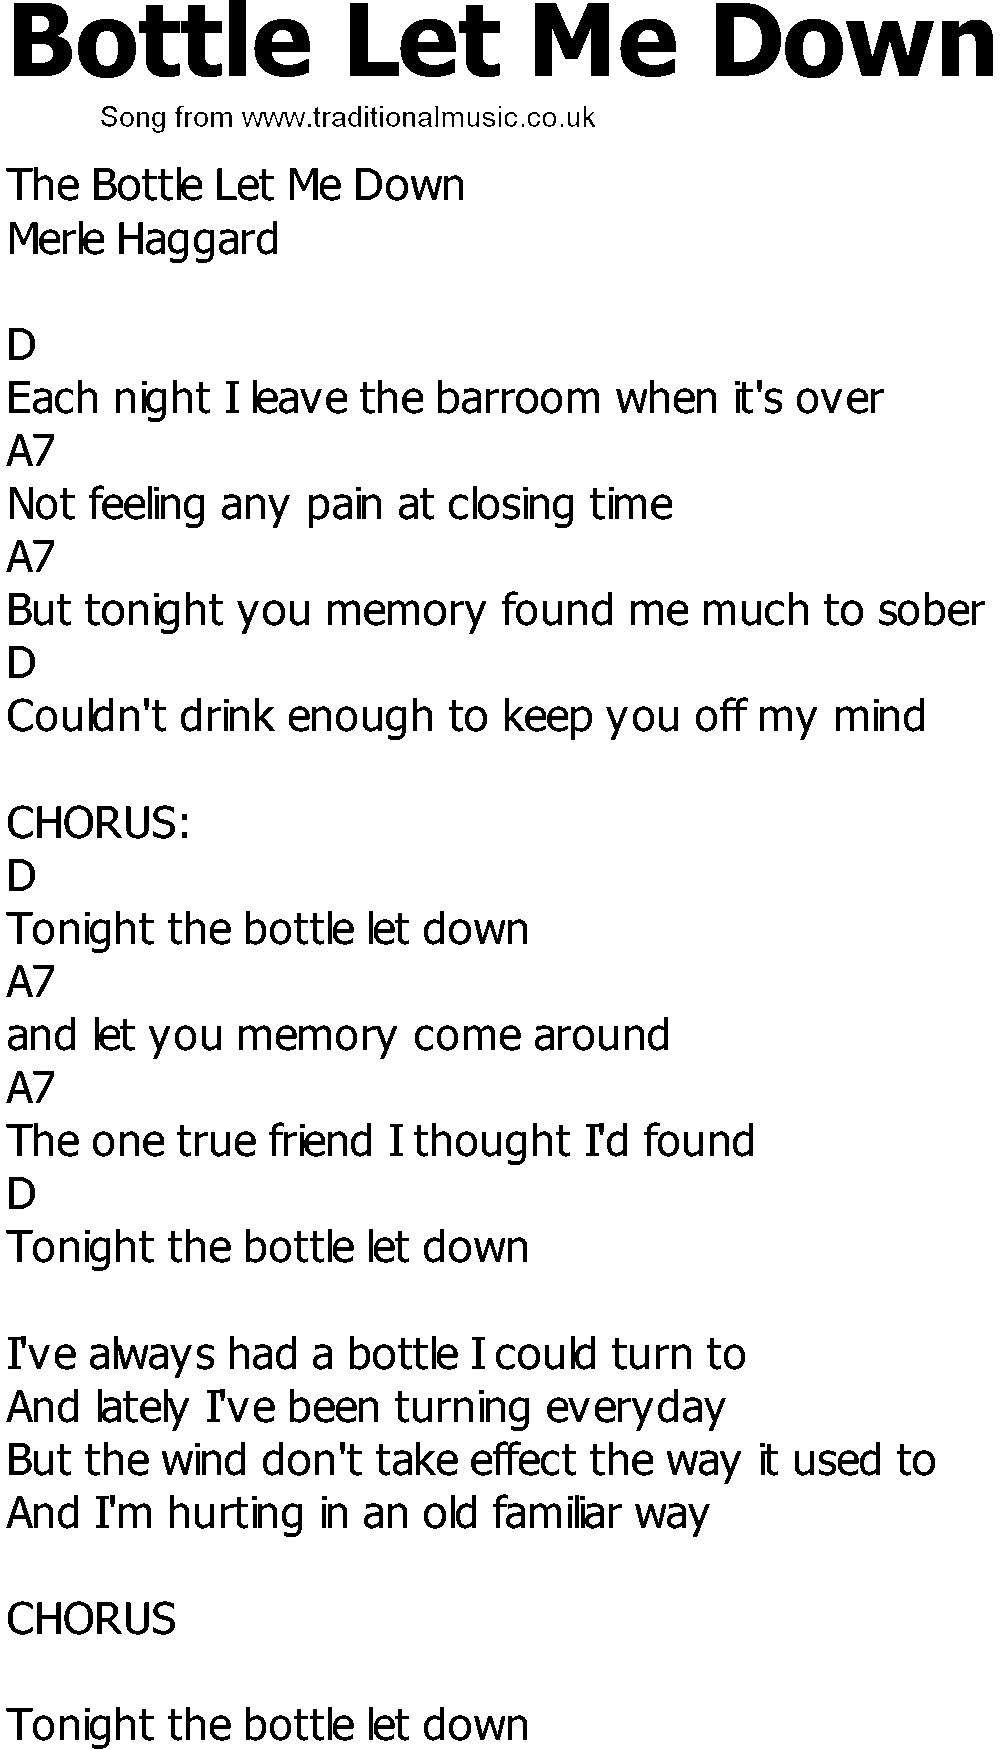 Old Country song lyrics with chords - Bottle Let Me Down